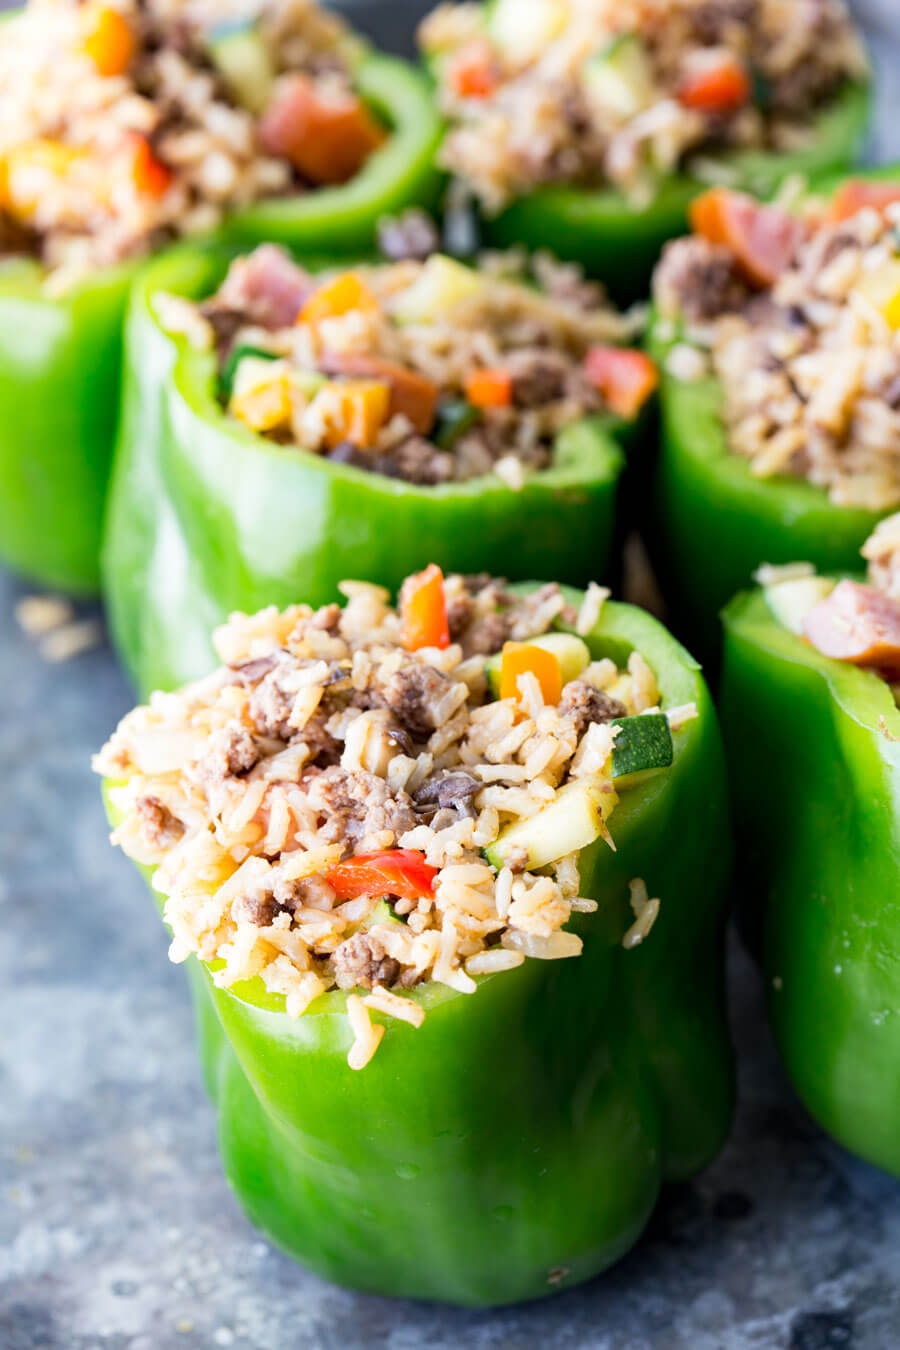 Green bell peppers stuffed with rice, sausage, and vegetables ready to be baked or frozen, sitting on a gray table